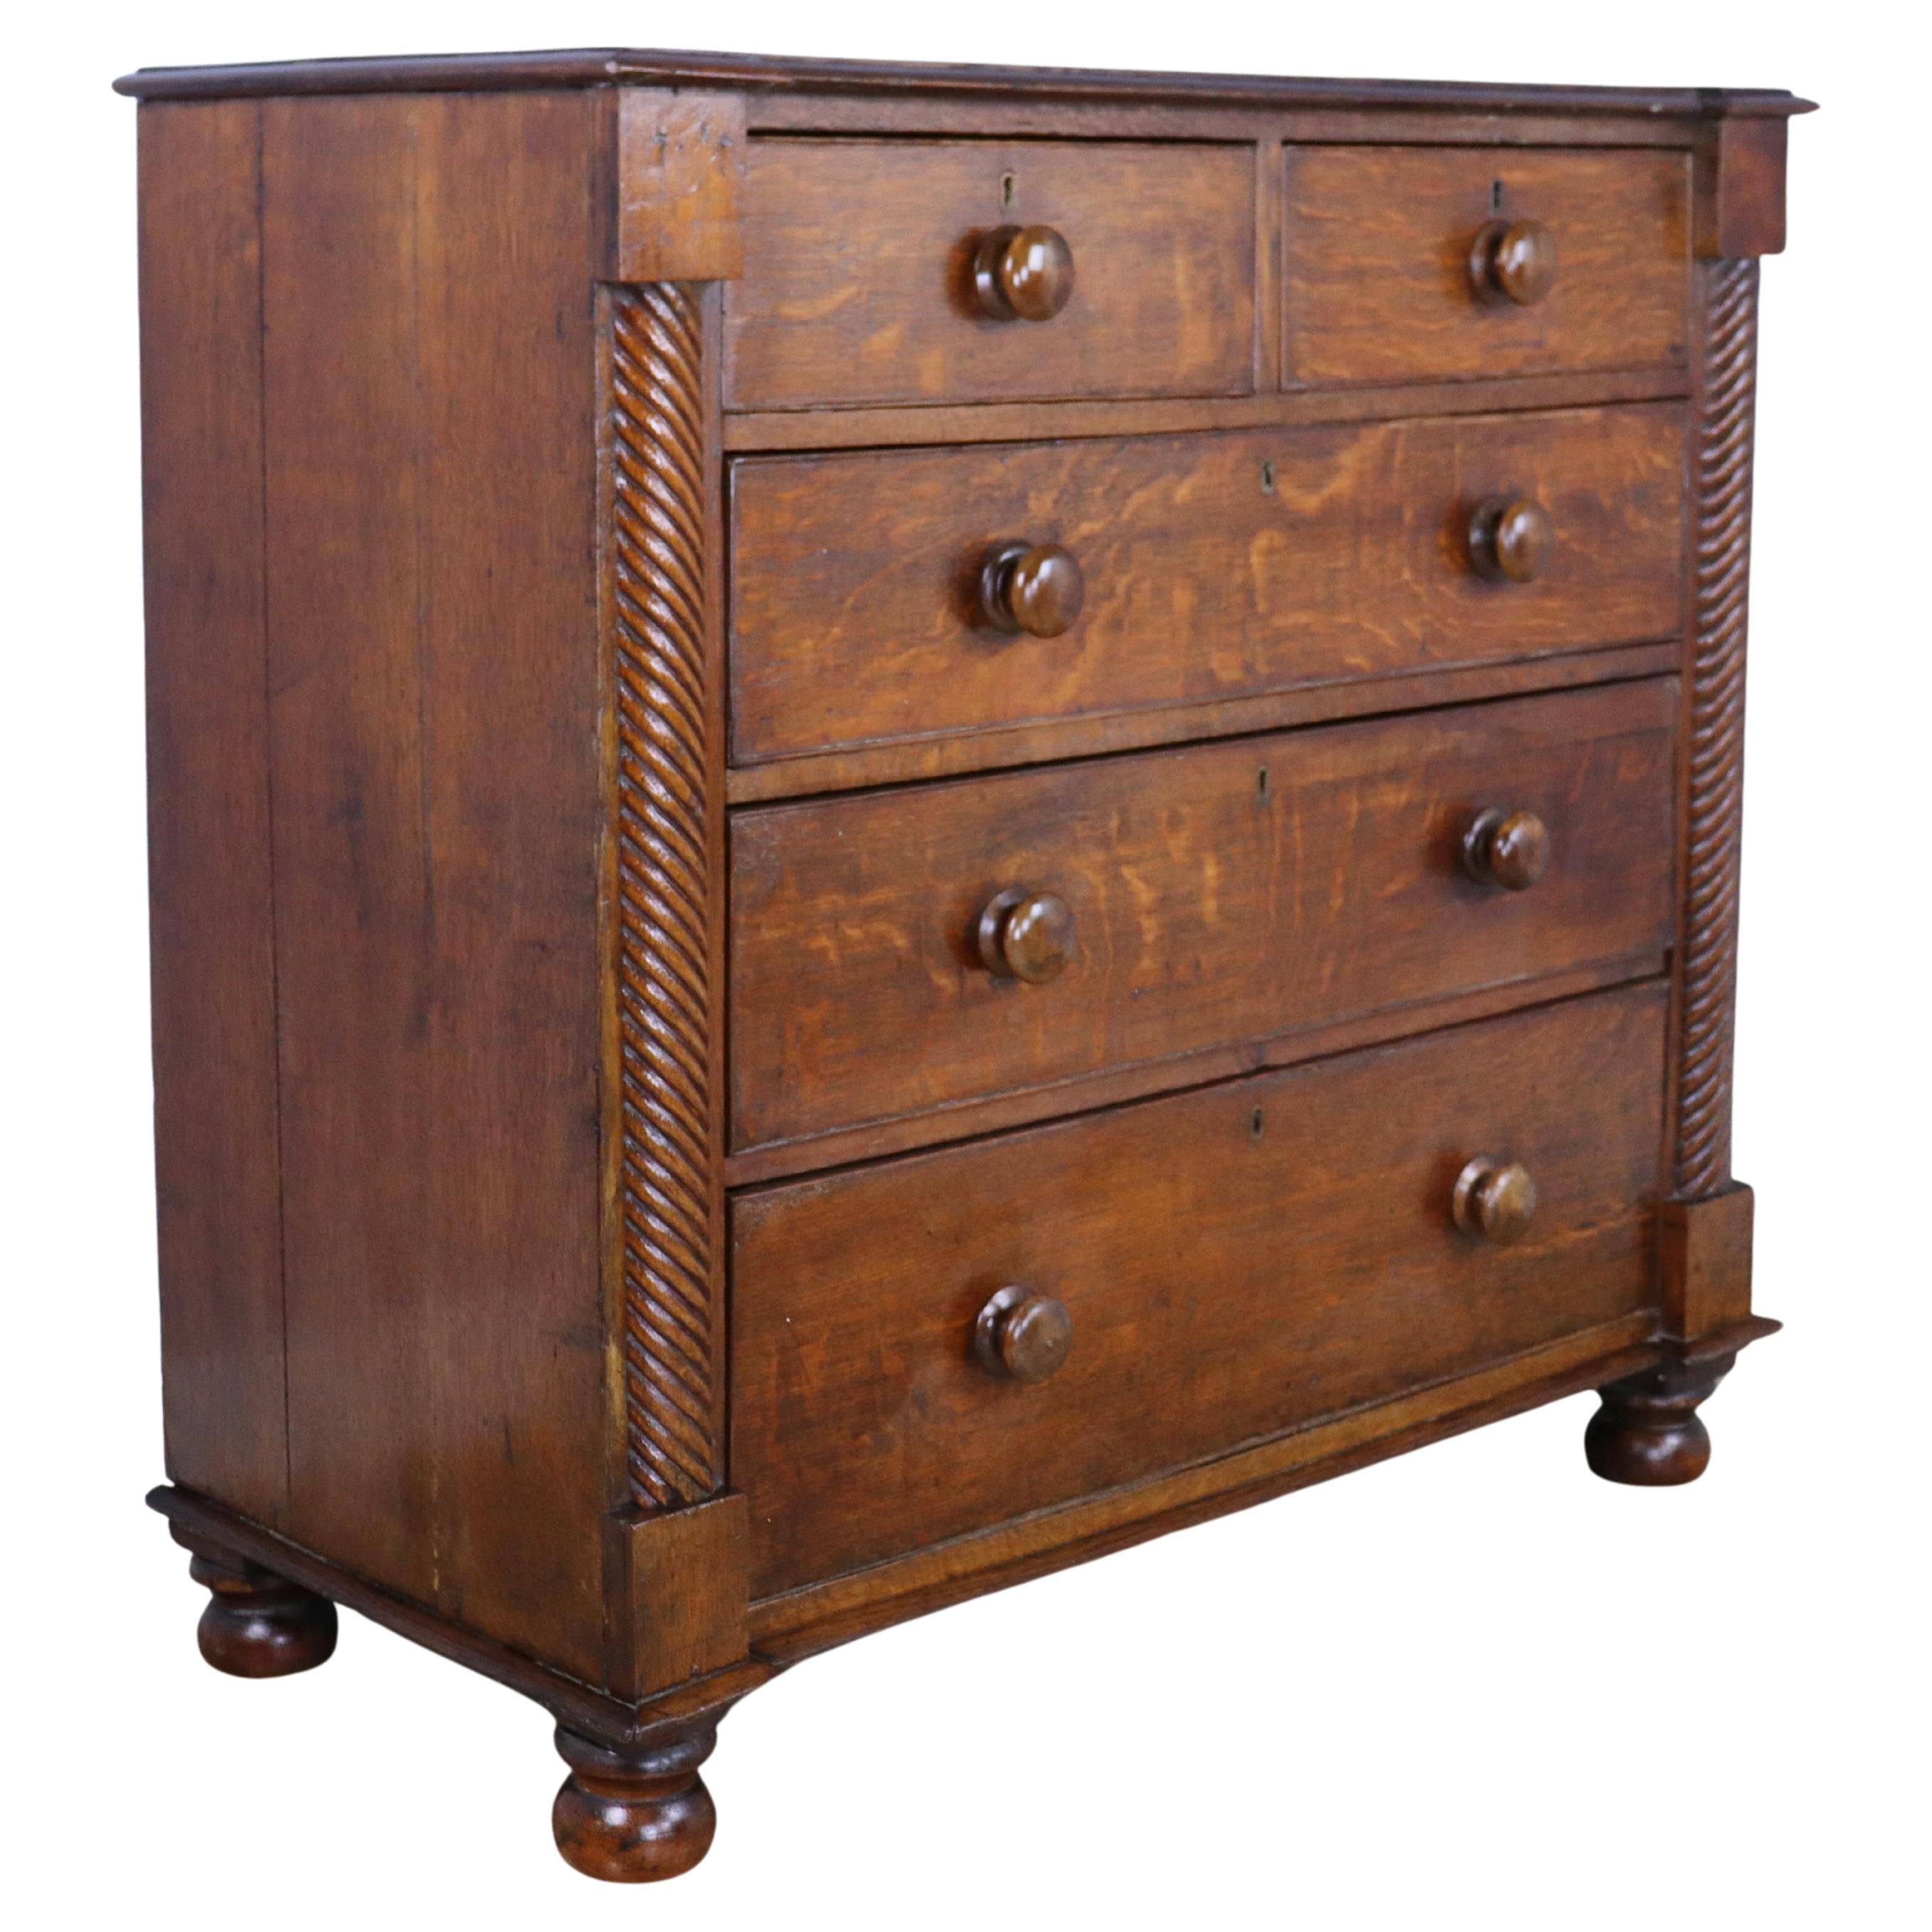 Welsh Oak Chest of Drawers with Twist Columns and Original Knobs